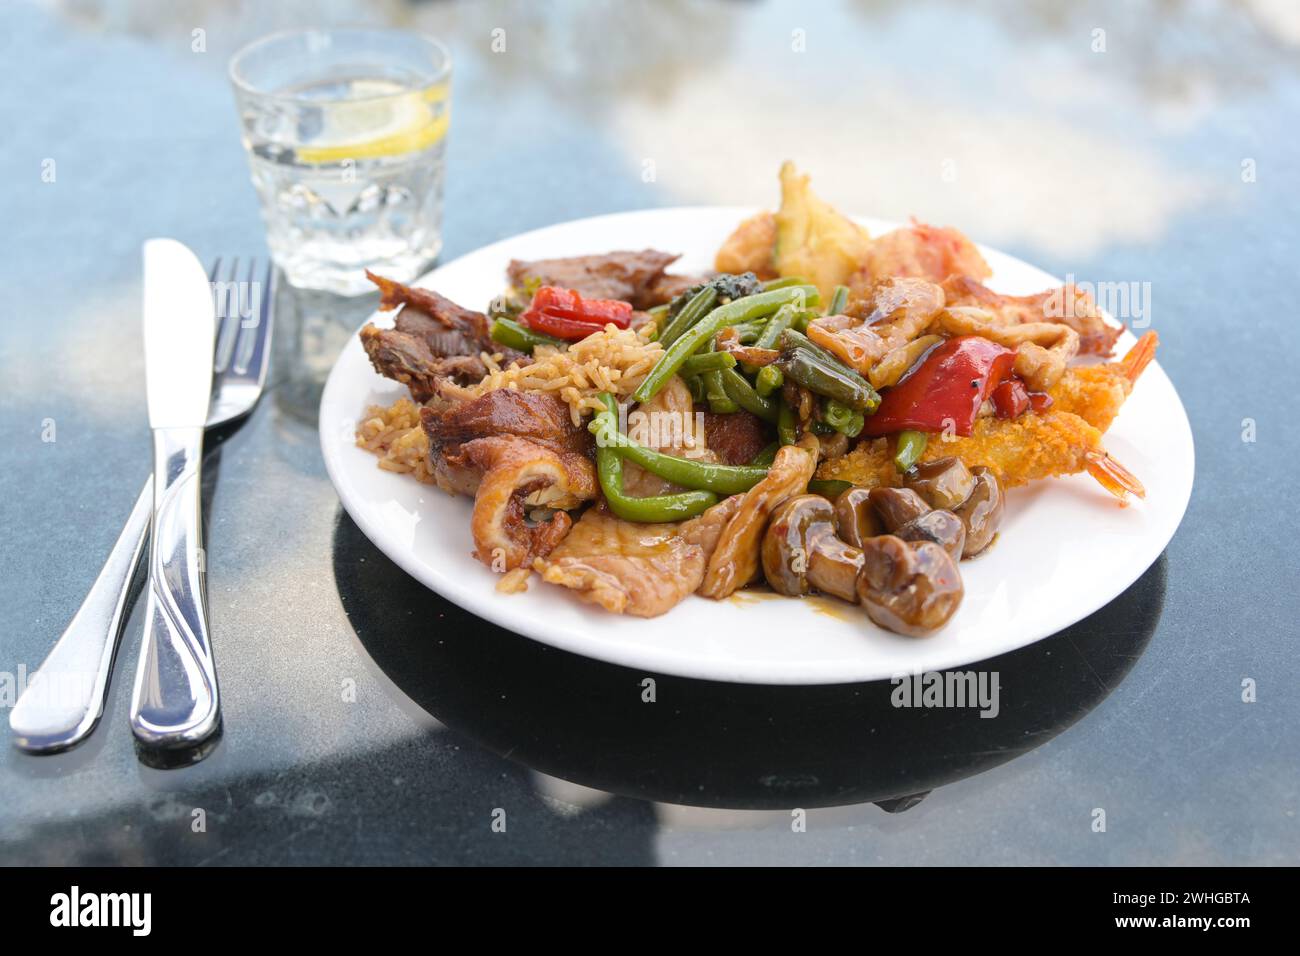 Chinese dish in a street restaurant, various meat and vegetables with fried rice on a white plate, cutlery and a glass with wate Stock Photo